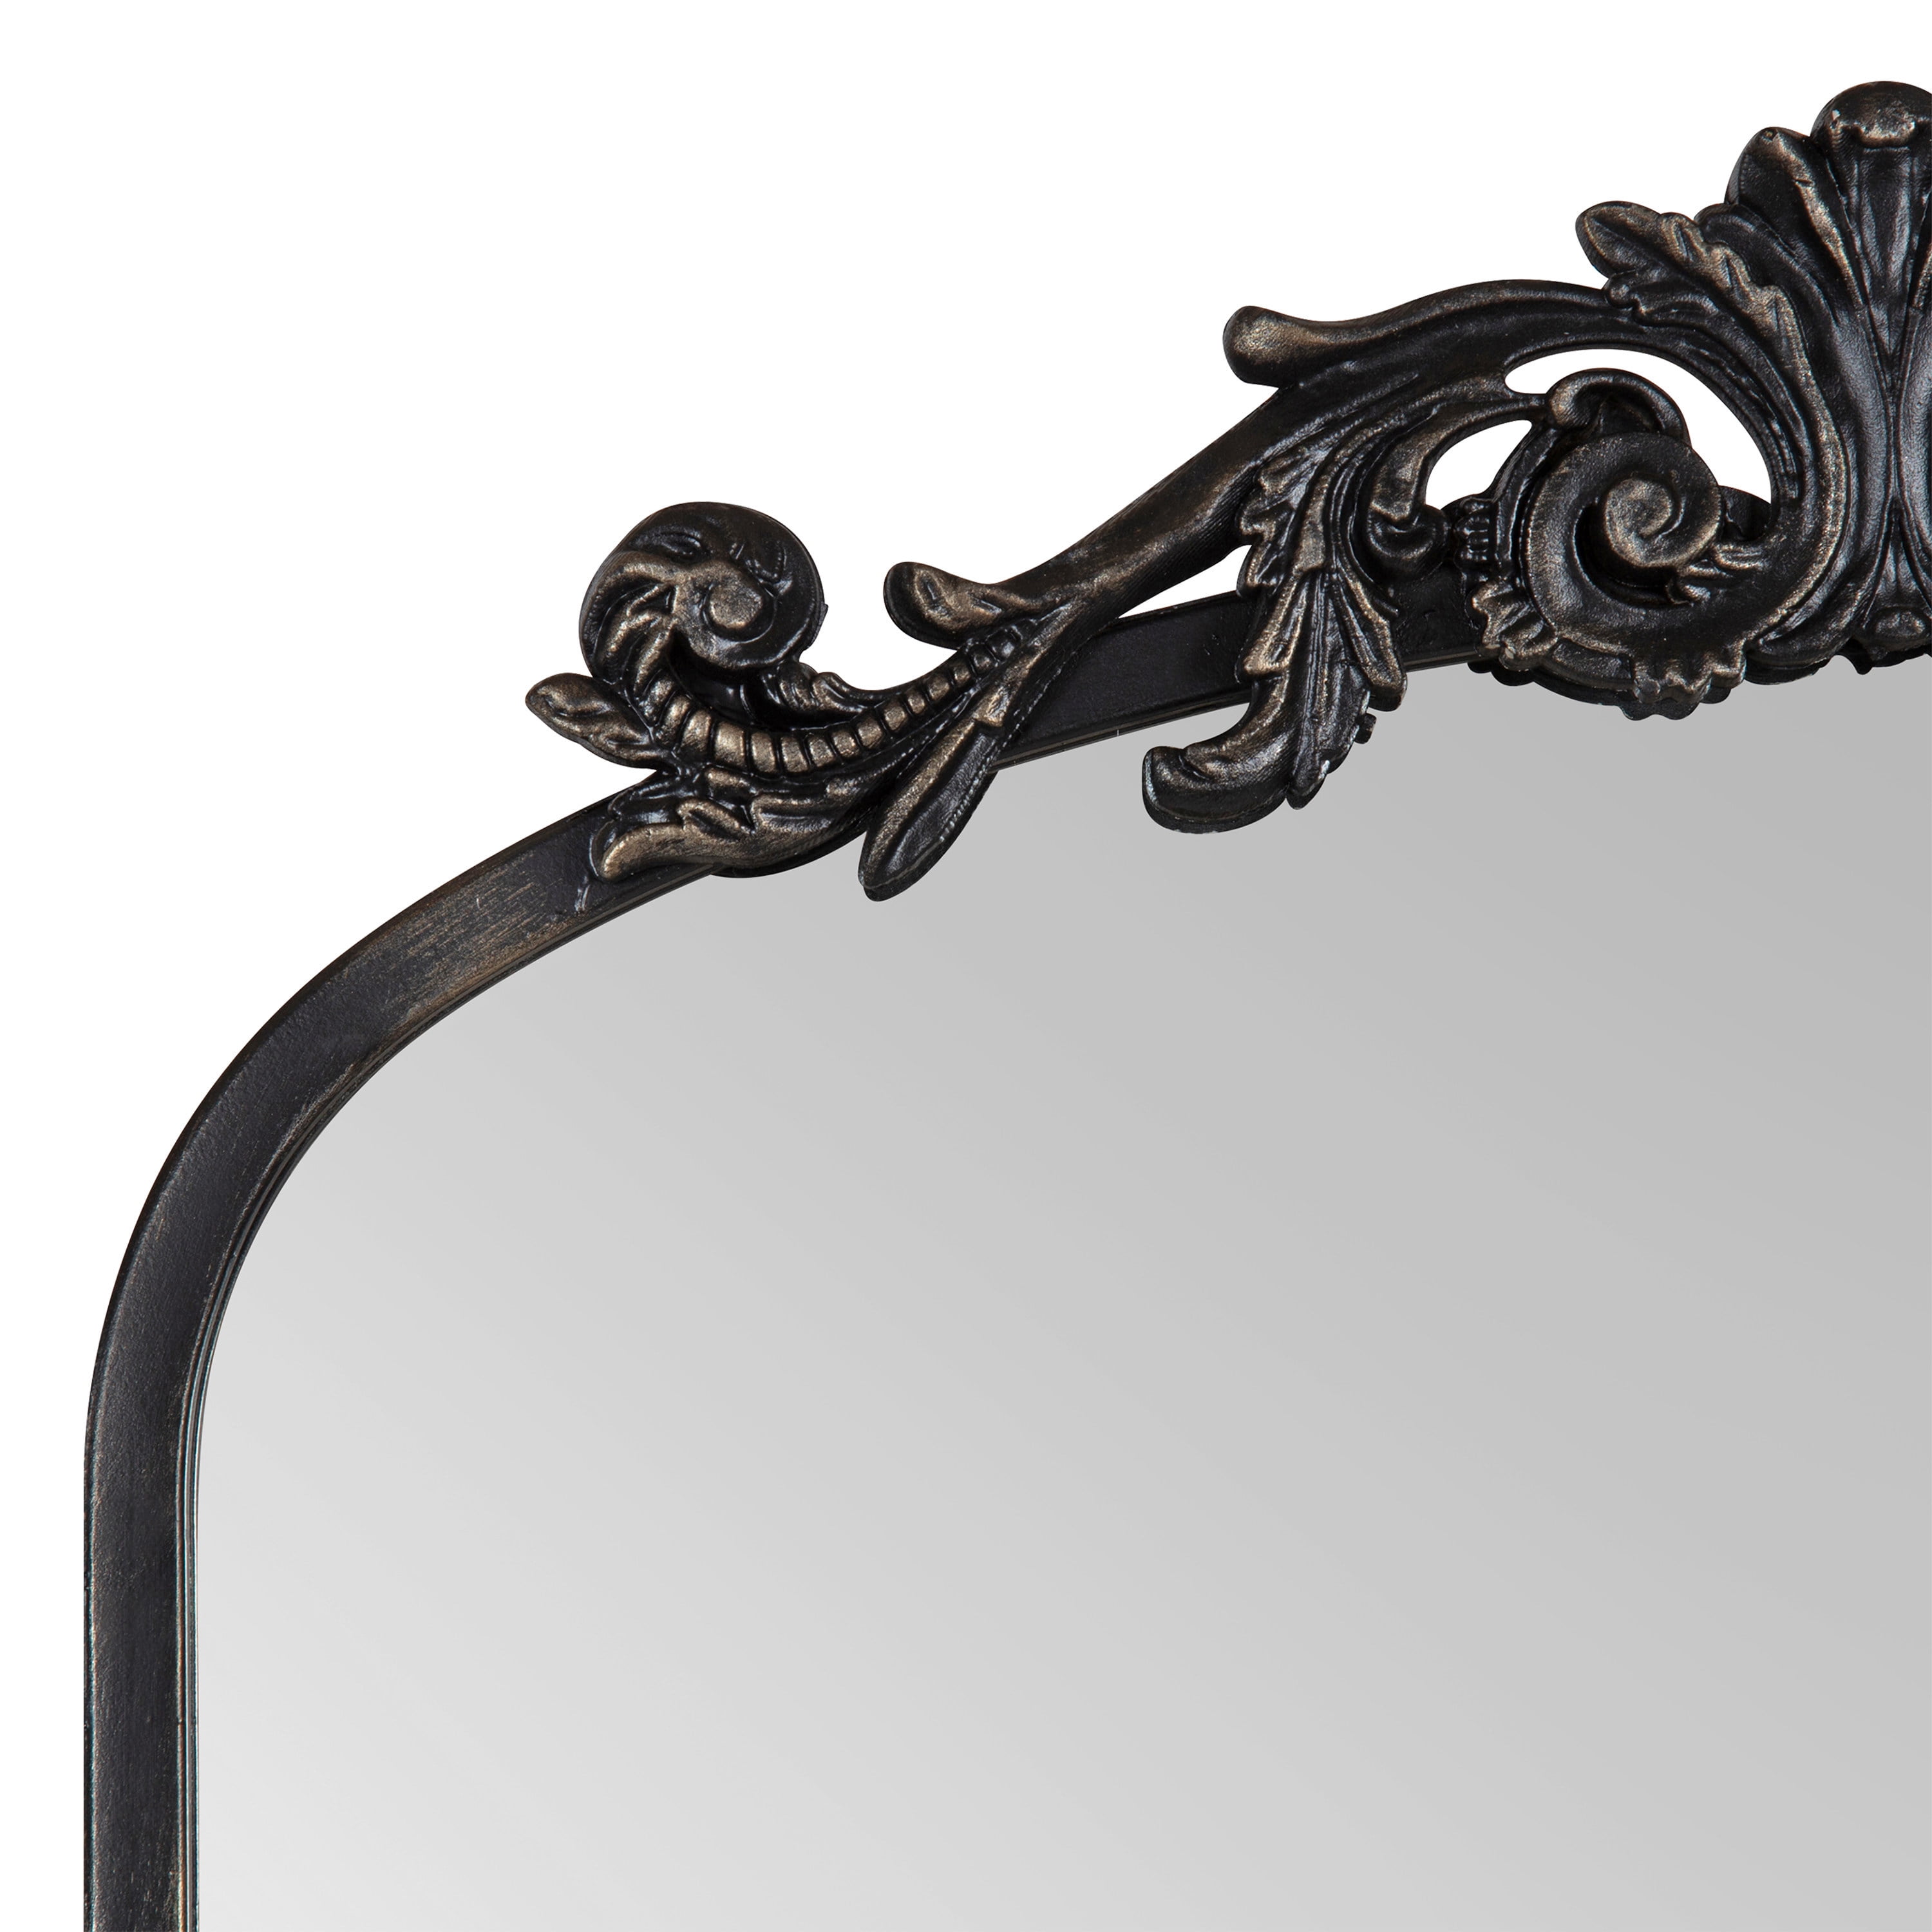 Set of 2 Matteo Square Antique Finish Wall Mirrors with Aged Black Metal  Frames